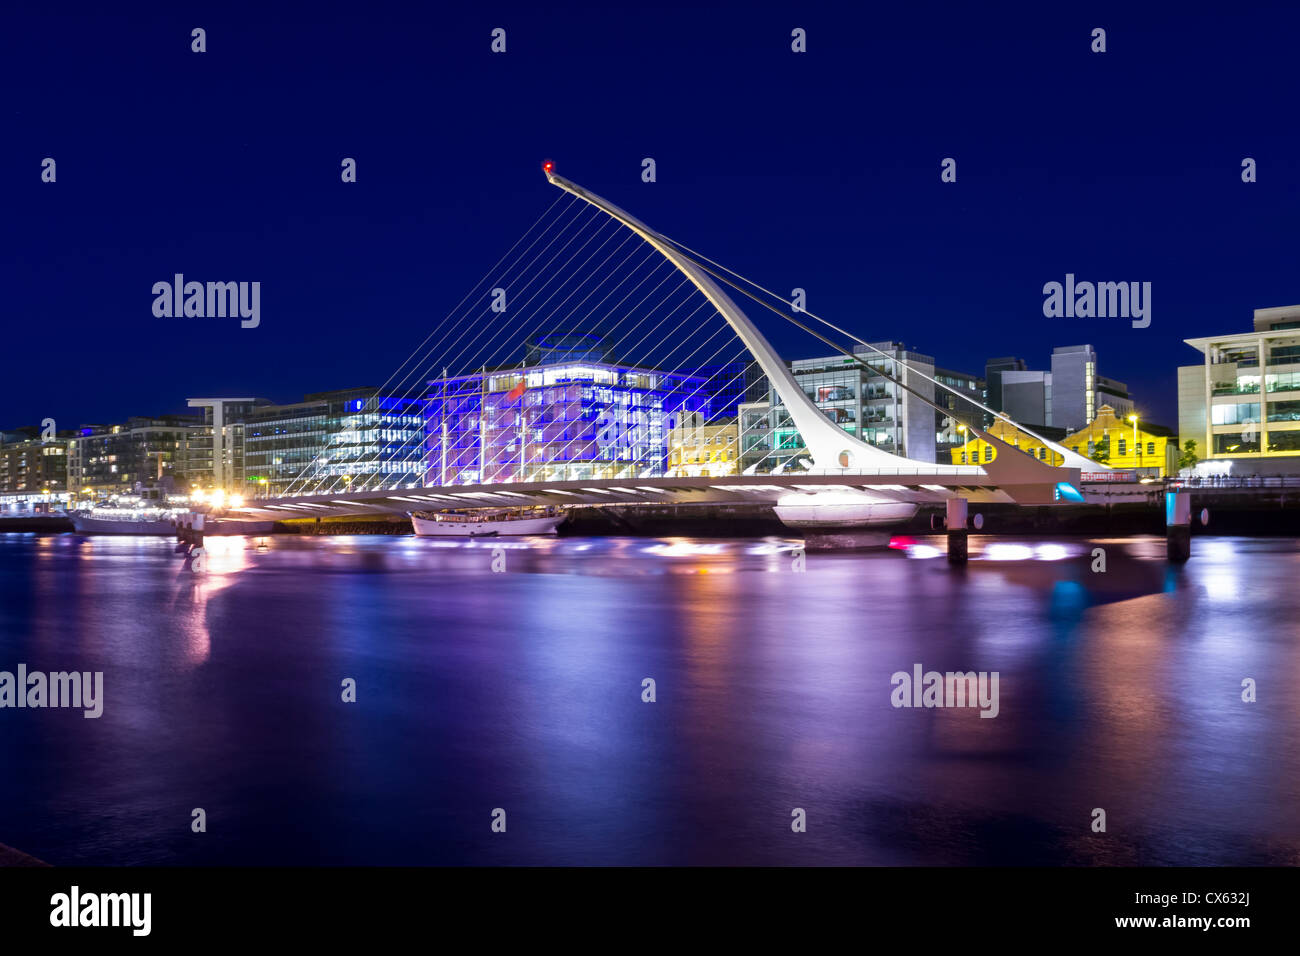 Samuel Beckett Bridge being open during the Tall Ship Race event. All trademarks and people have been removed. Stock Photo